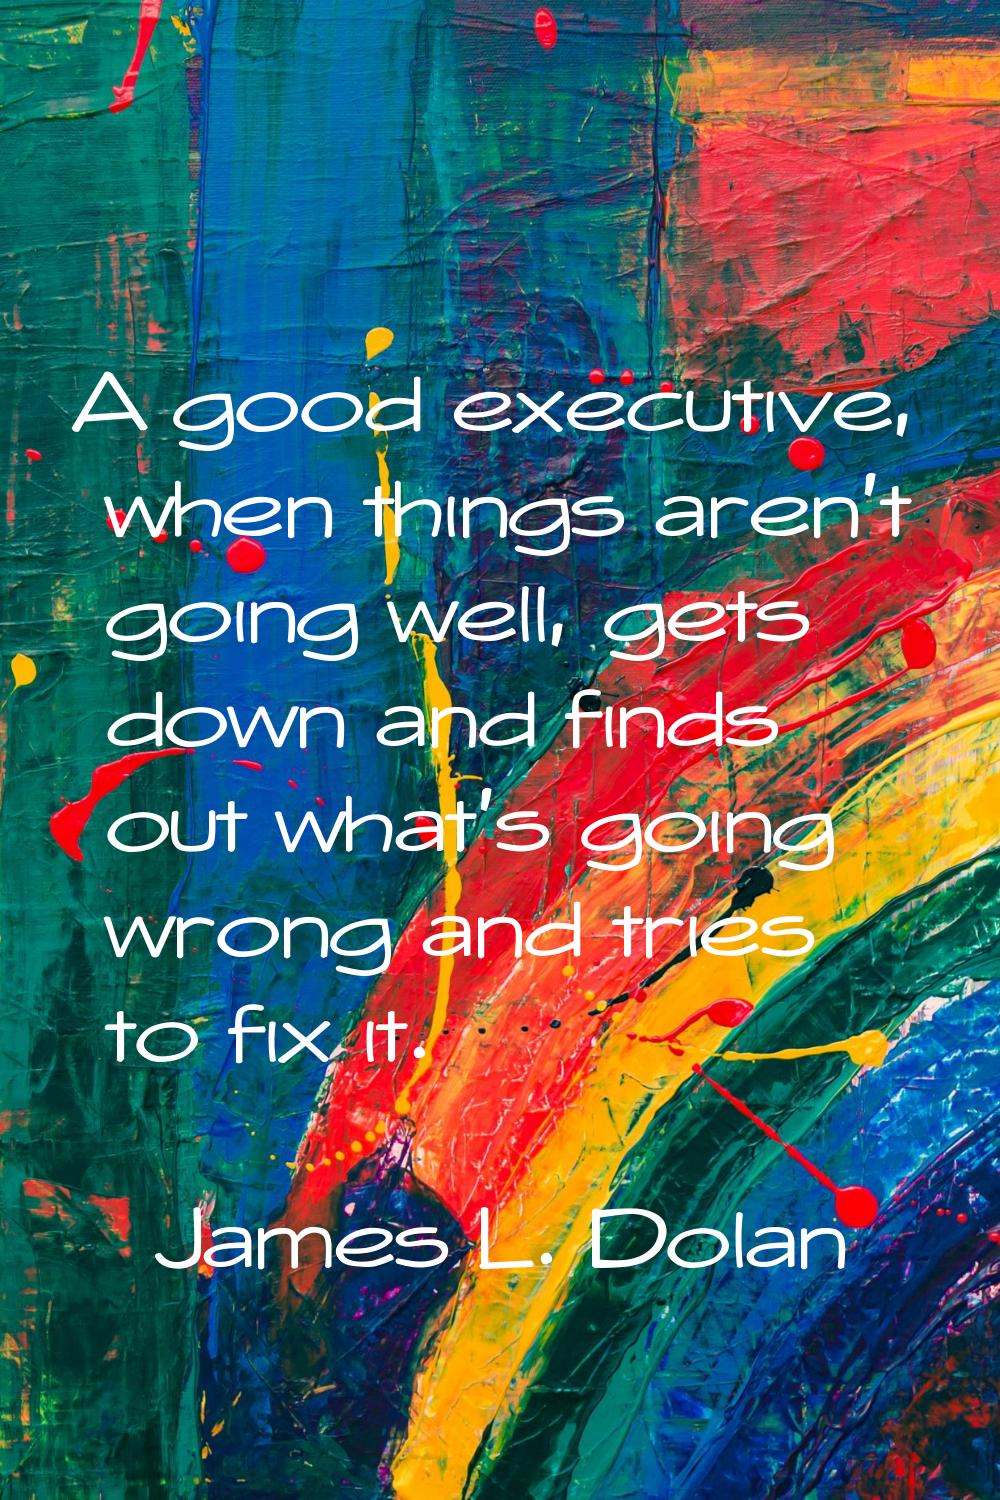 A good executive, when things aren't going well, gets down and finds out what's going wrong and tri